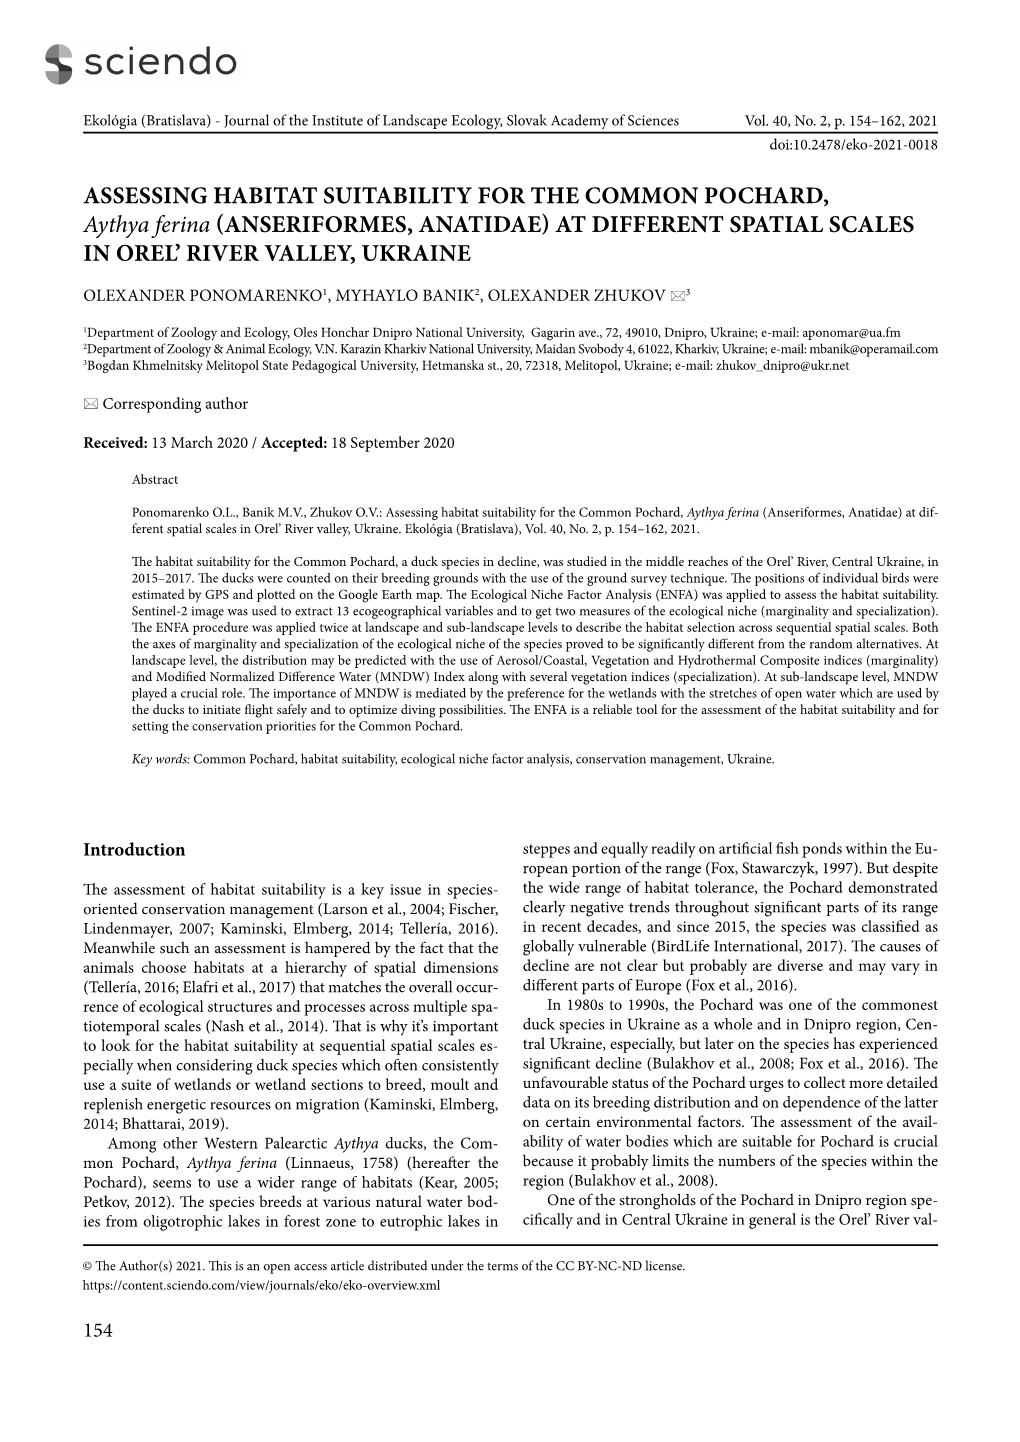 ASSESSING HABITAT SUITABILITY for the COMMON POCHARD, Aythya Ferina (ANSERIFORMES, ANATIDAE) at DIFFERENT SPATIAL SCALES in OREL’ RIVER VALLEY, UKRAINE